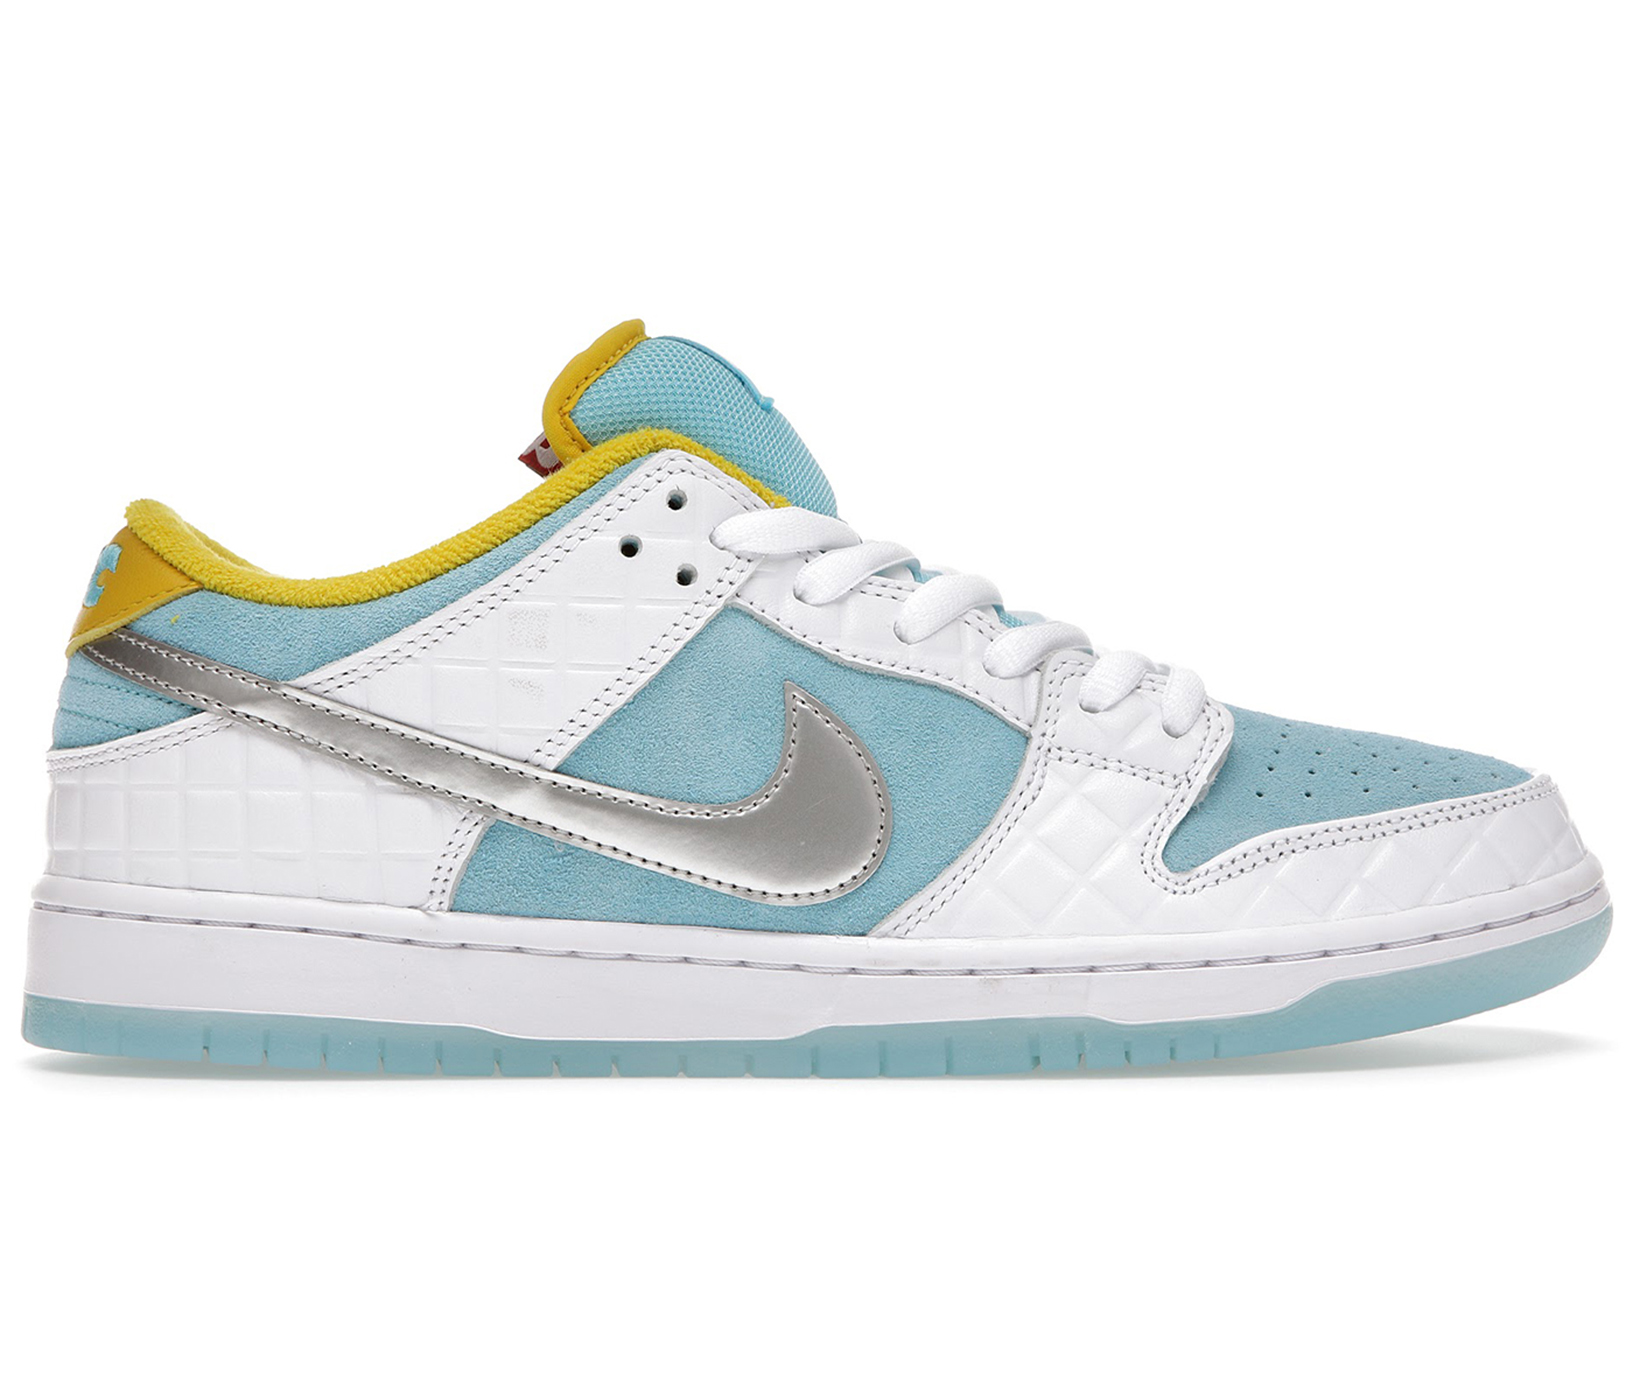 Nike SB Dunk Low FTC Lagoon Pulse (Special Box) Men's - DH7687-400 